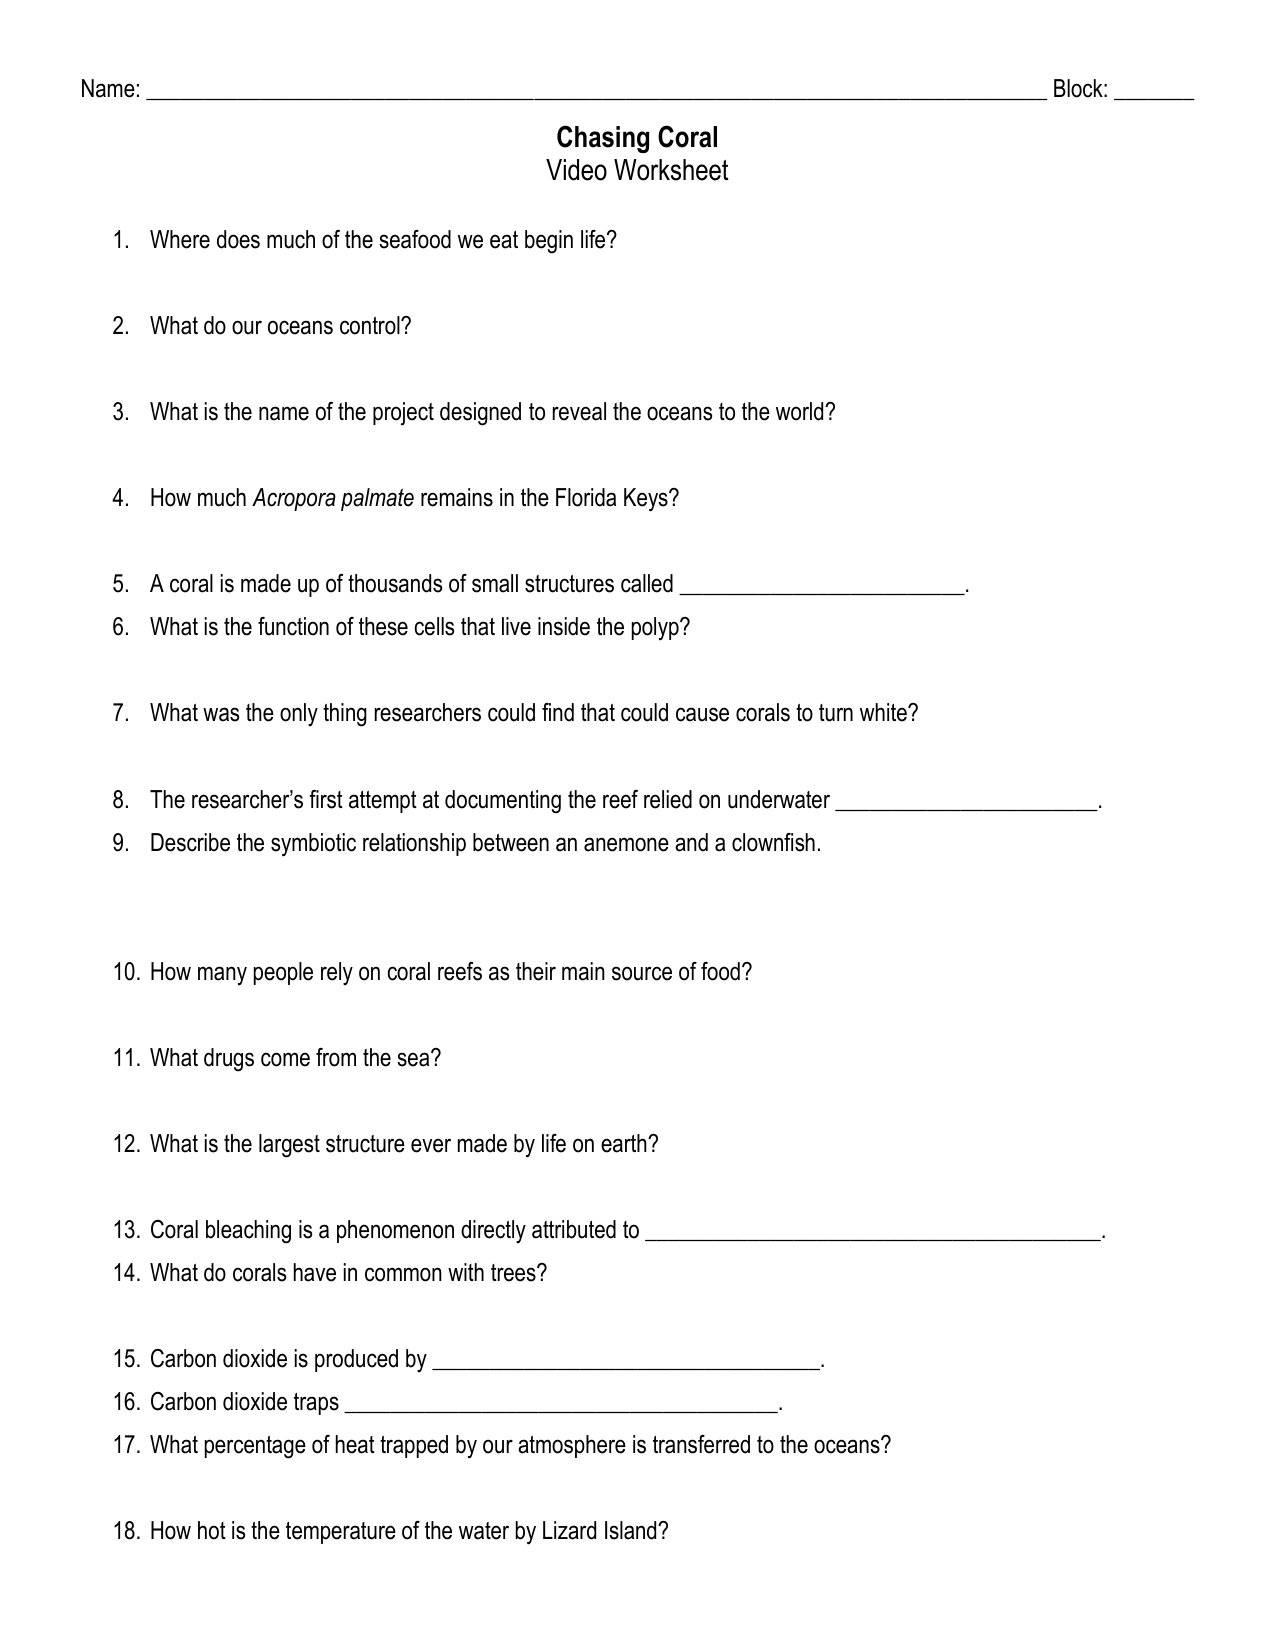 Chasing Coral Documentary Worksheet Answers